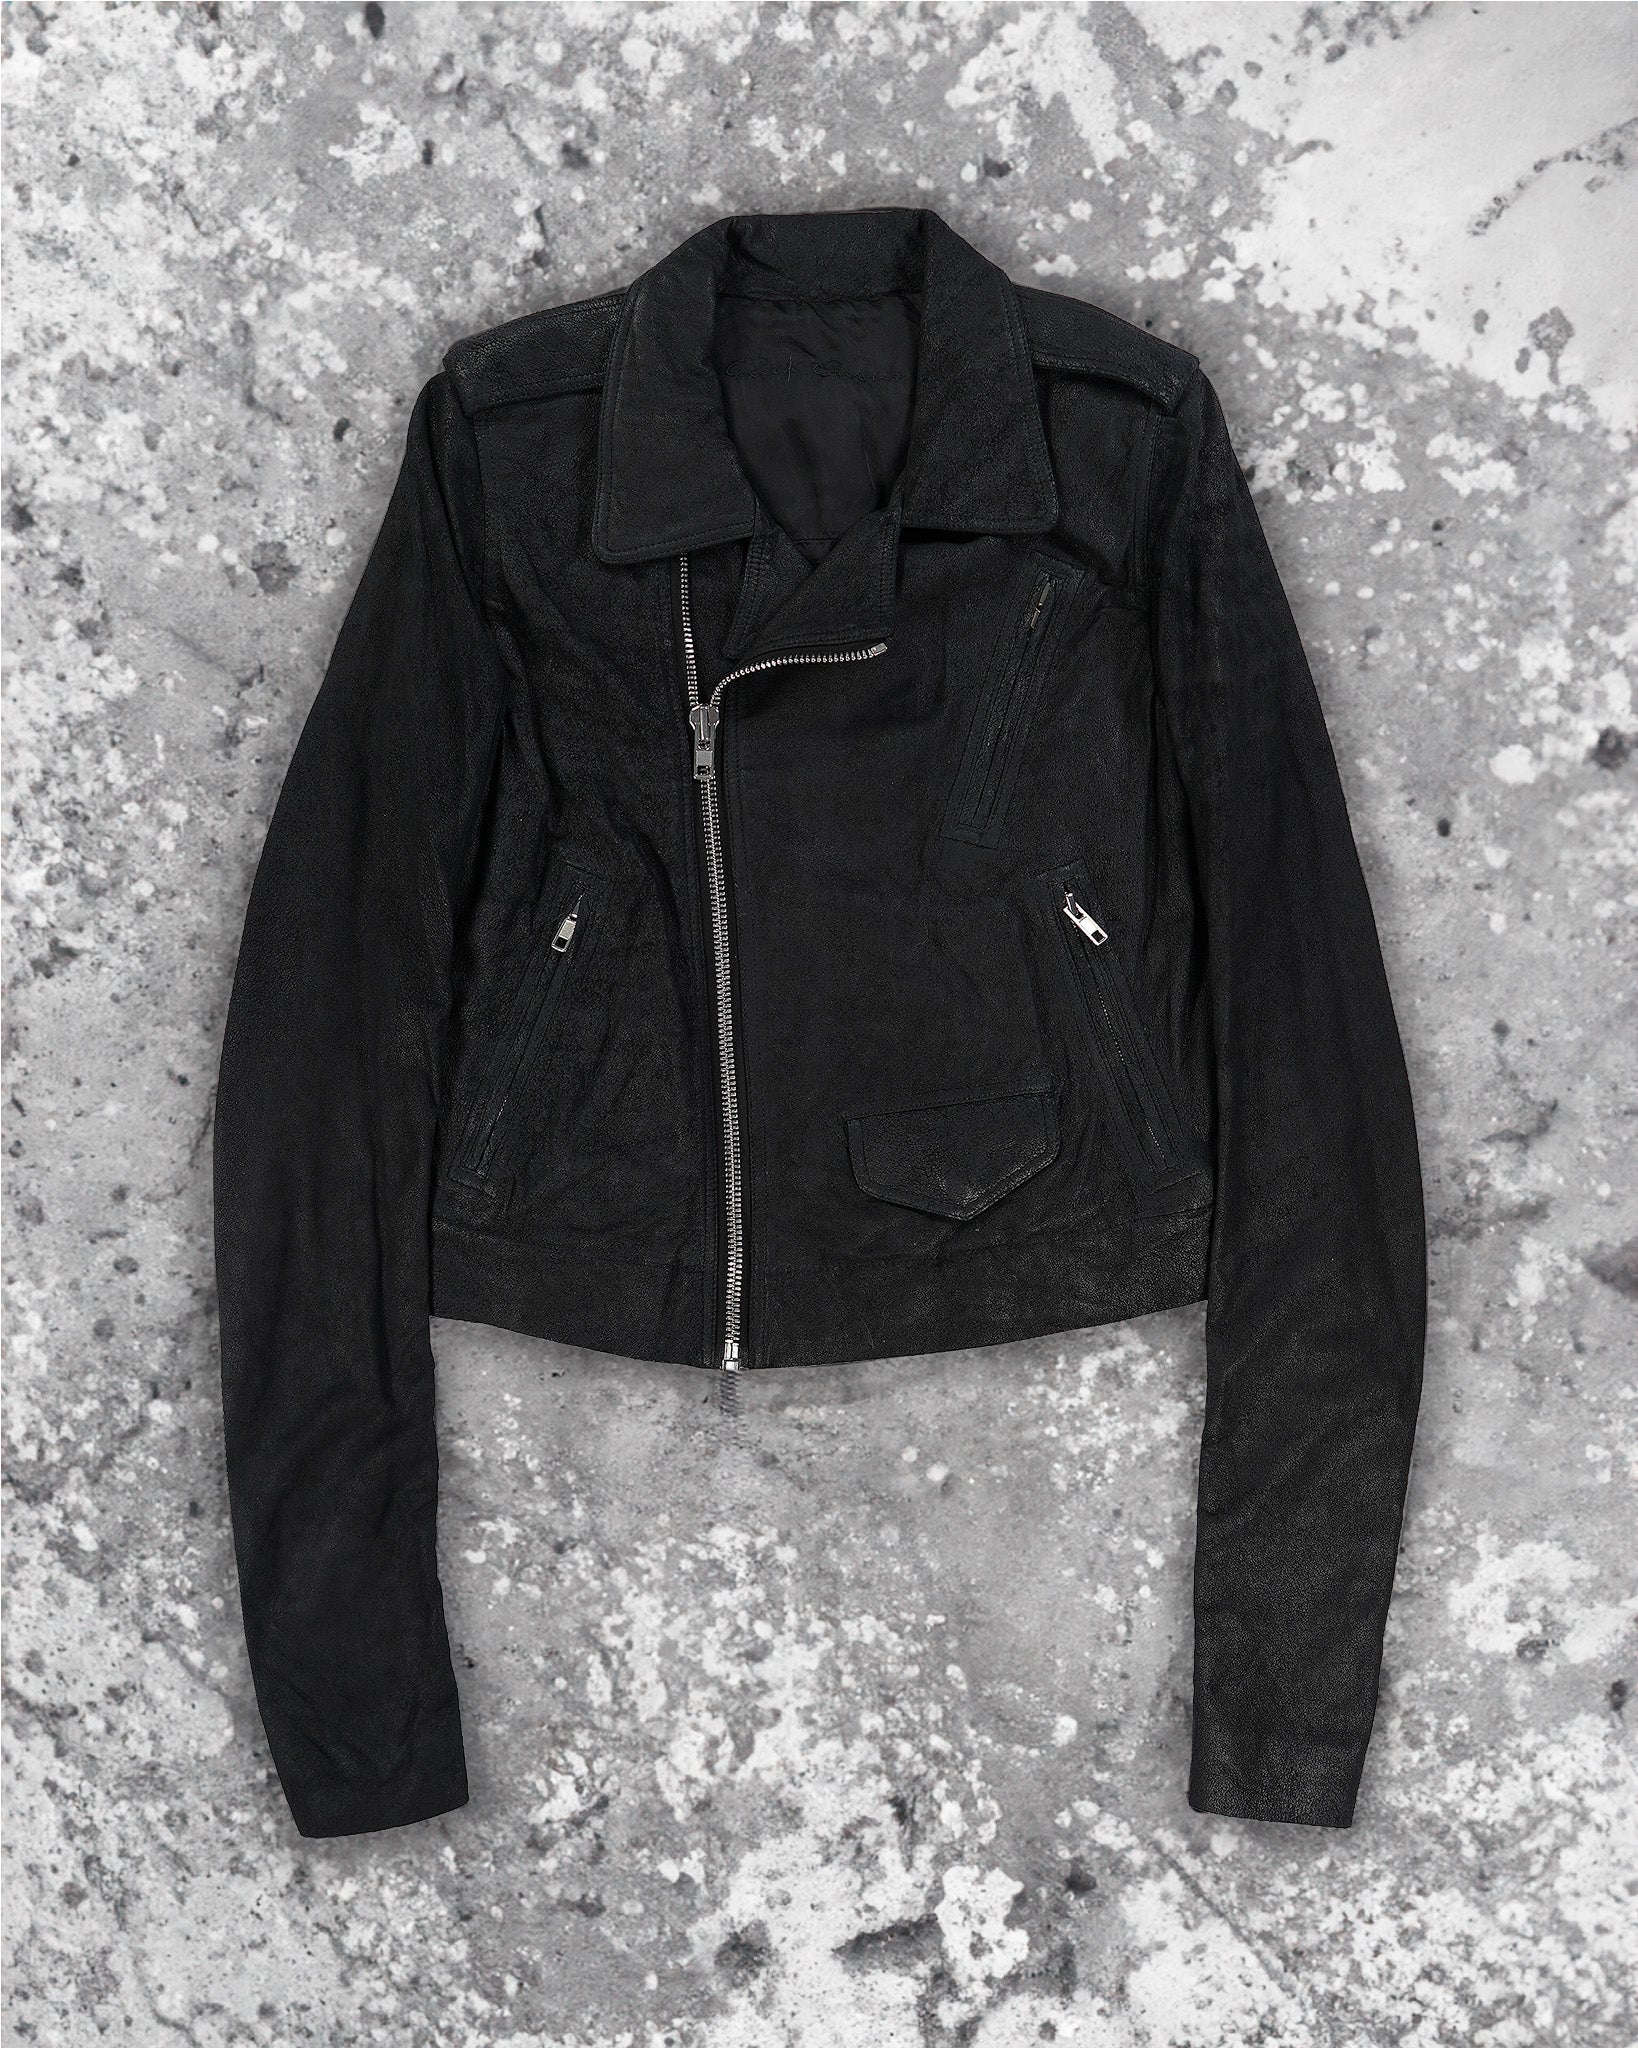 Rick Owens “Blistered” Leather Stooges Jacket - FW14 “Moody”